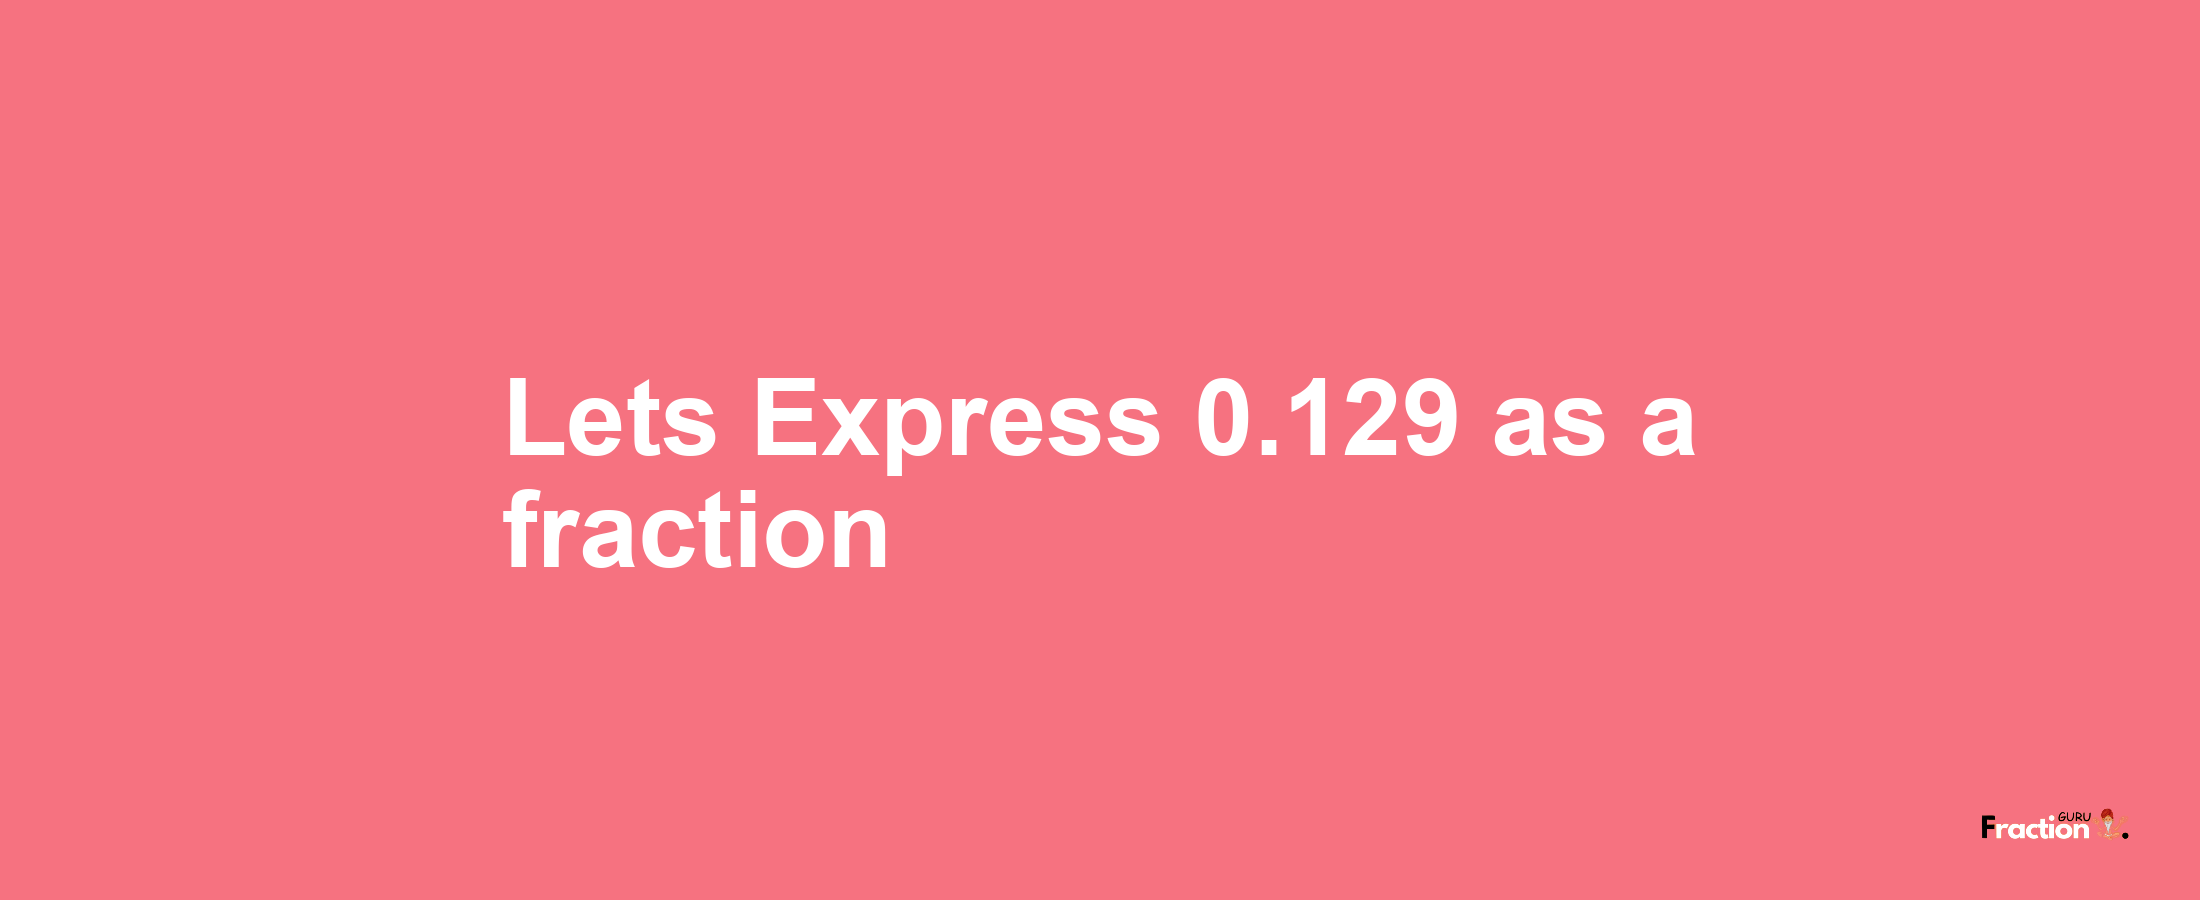 Lets Express 0.129 as afraction